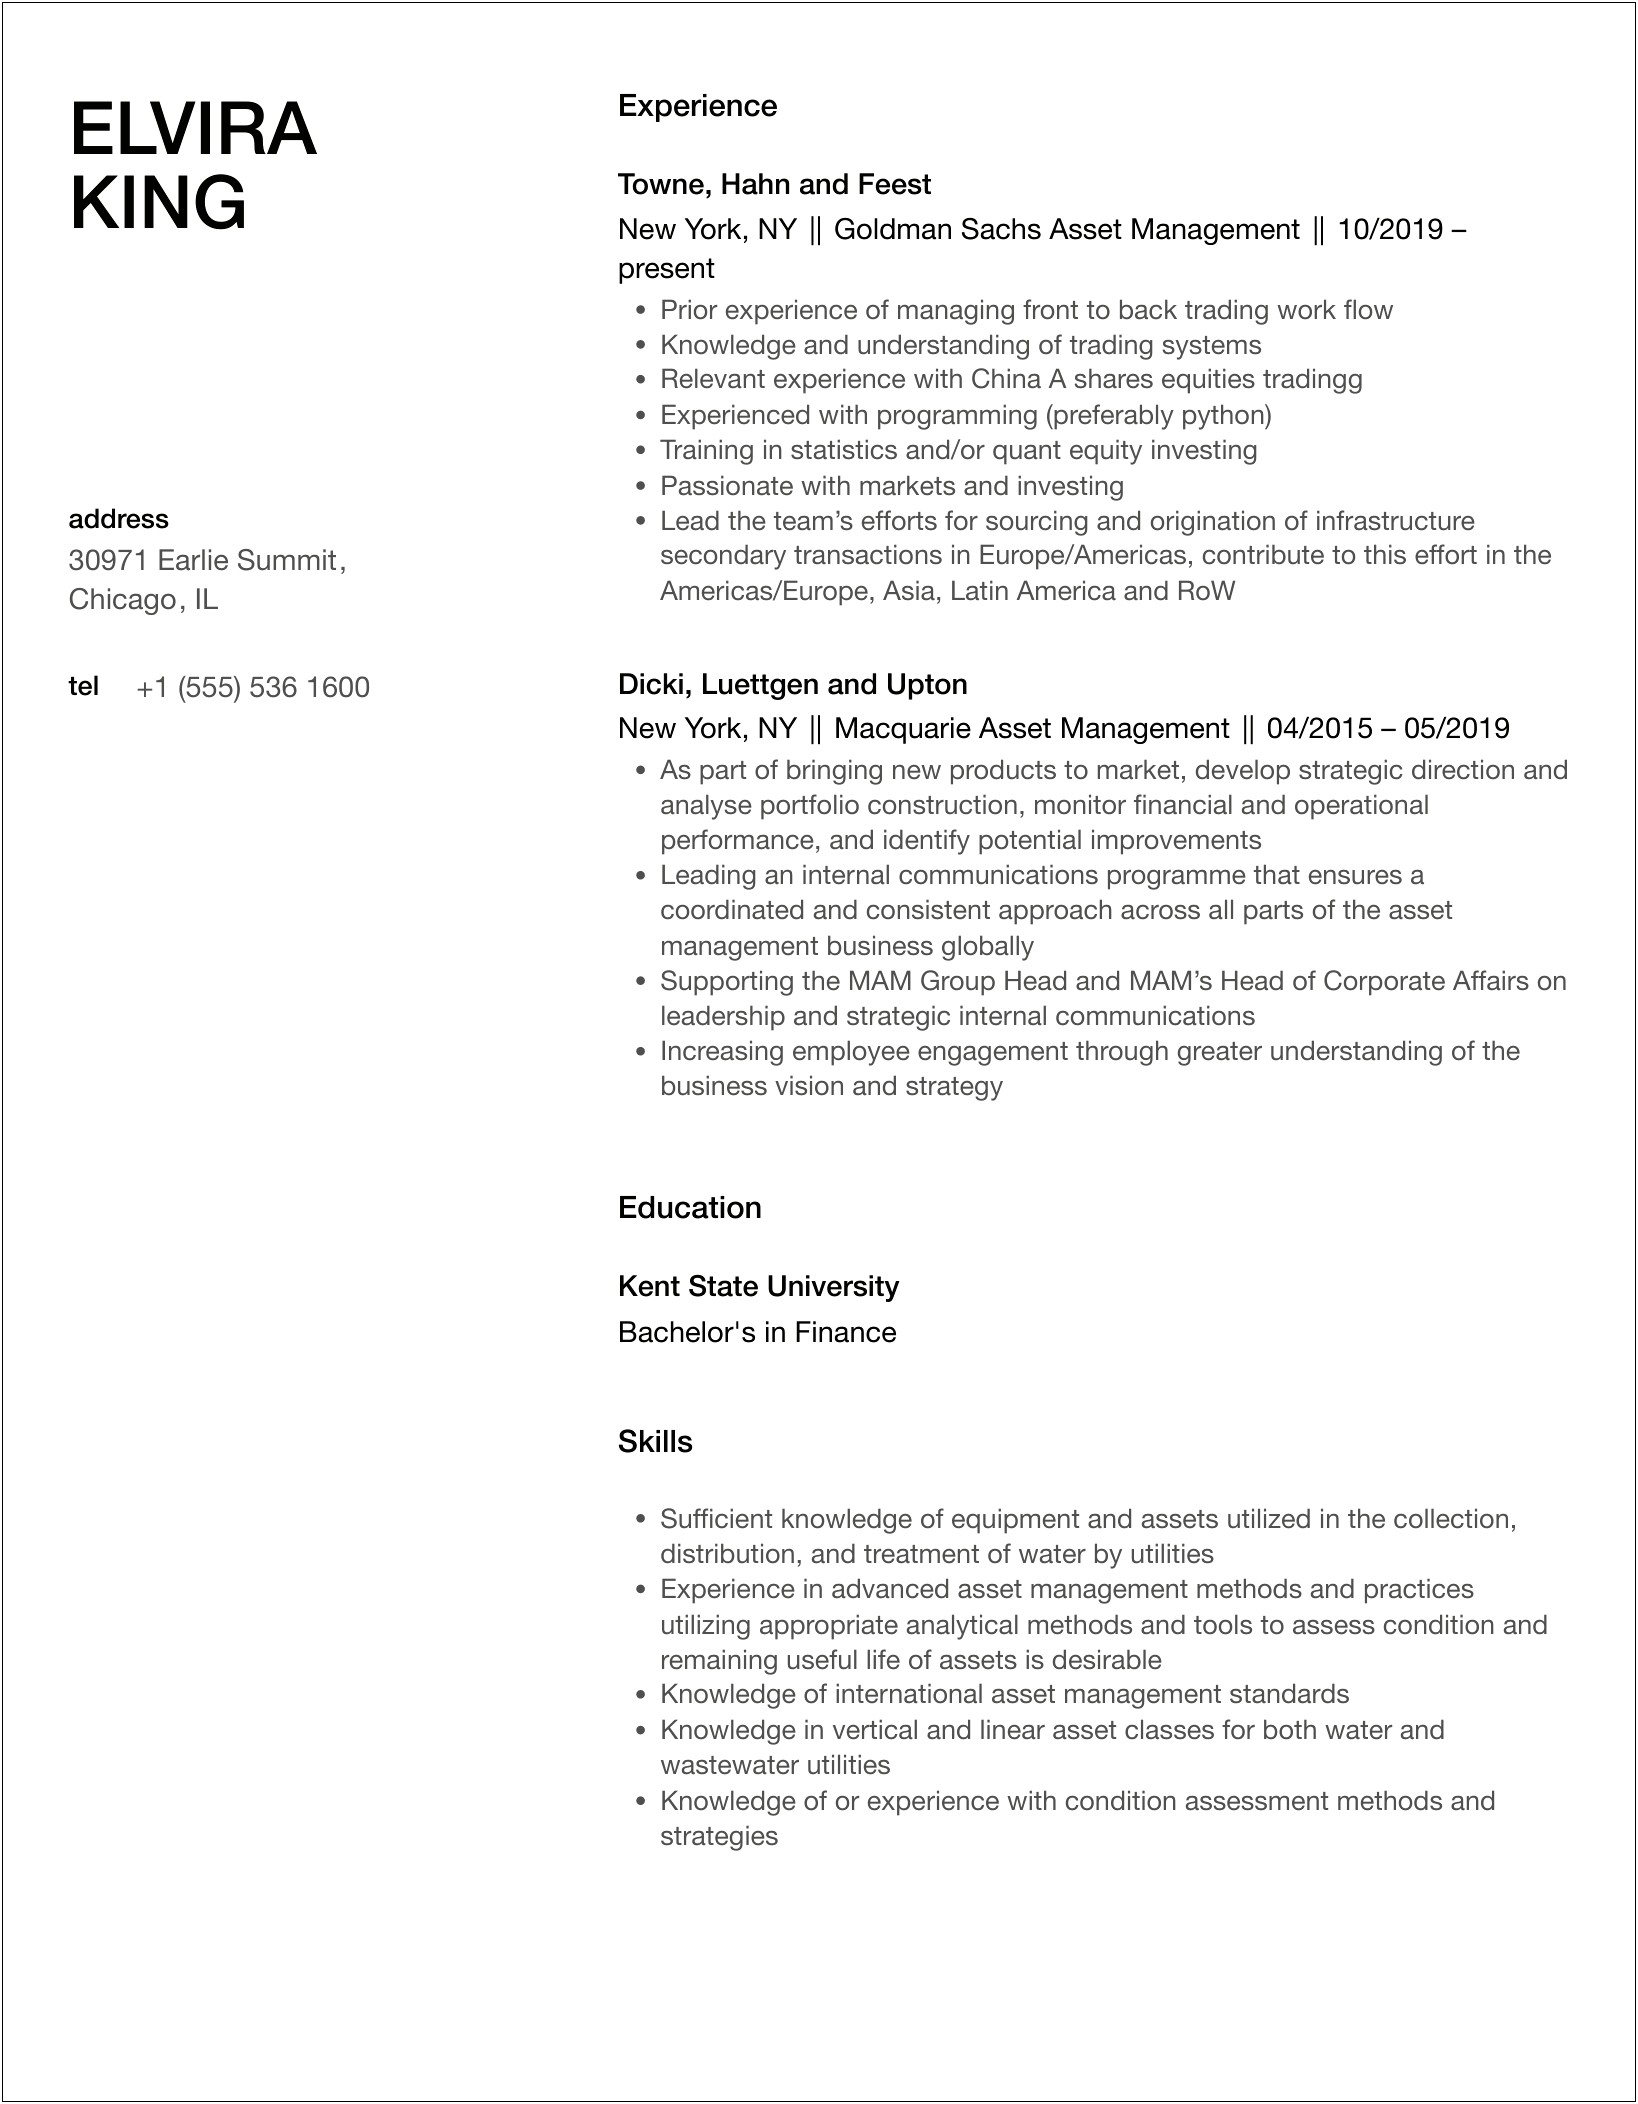 Resume Statement For Assets Lifecycle Management